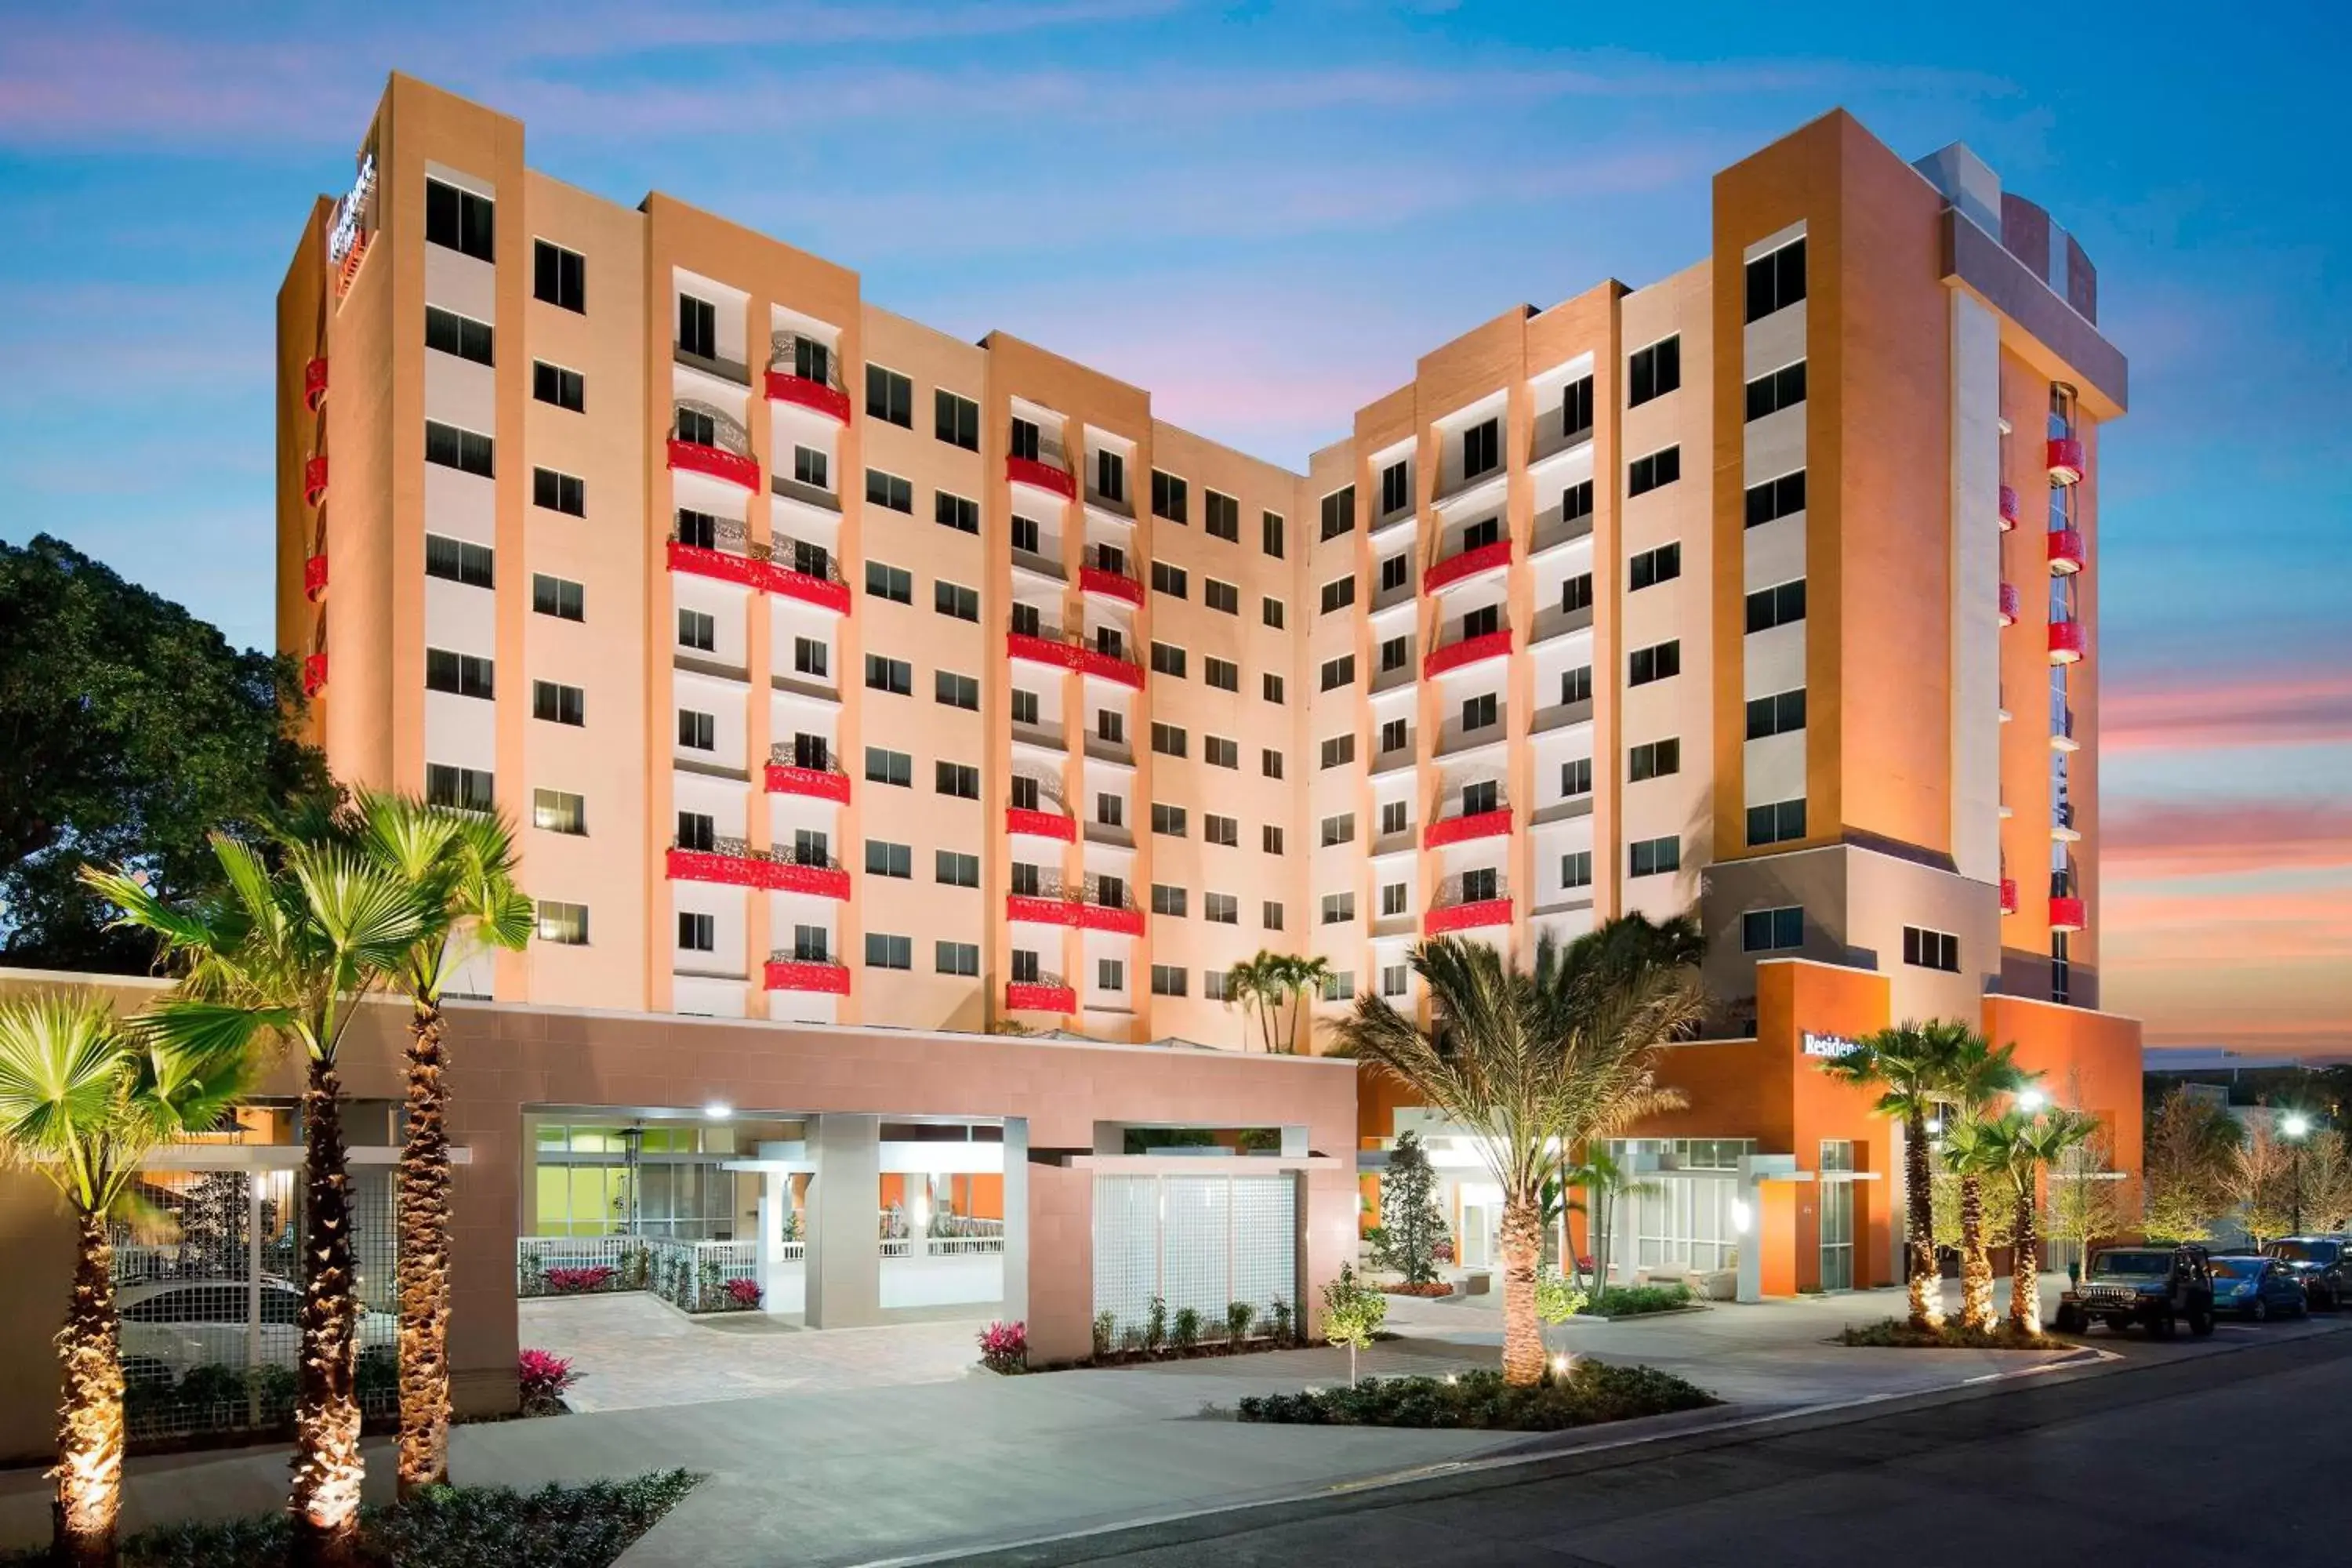 Property Building in Residence Inn by Marriott West Palm Beach Downtown